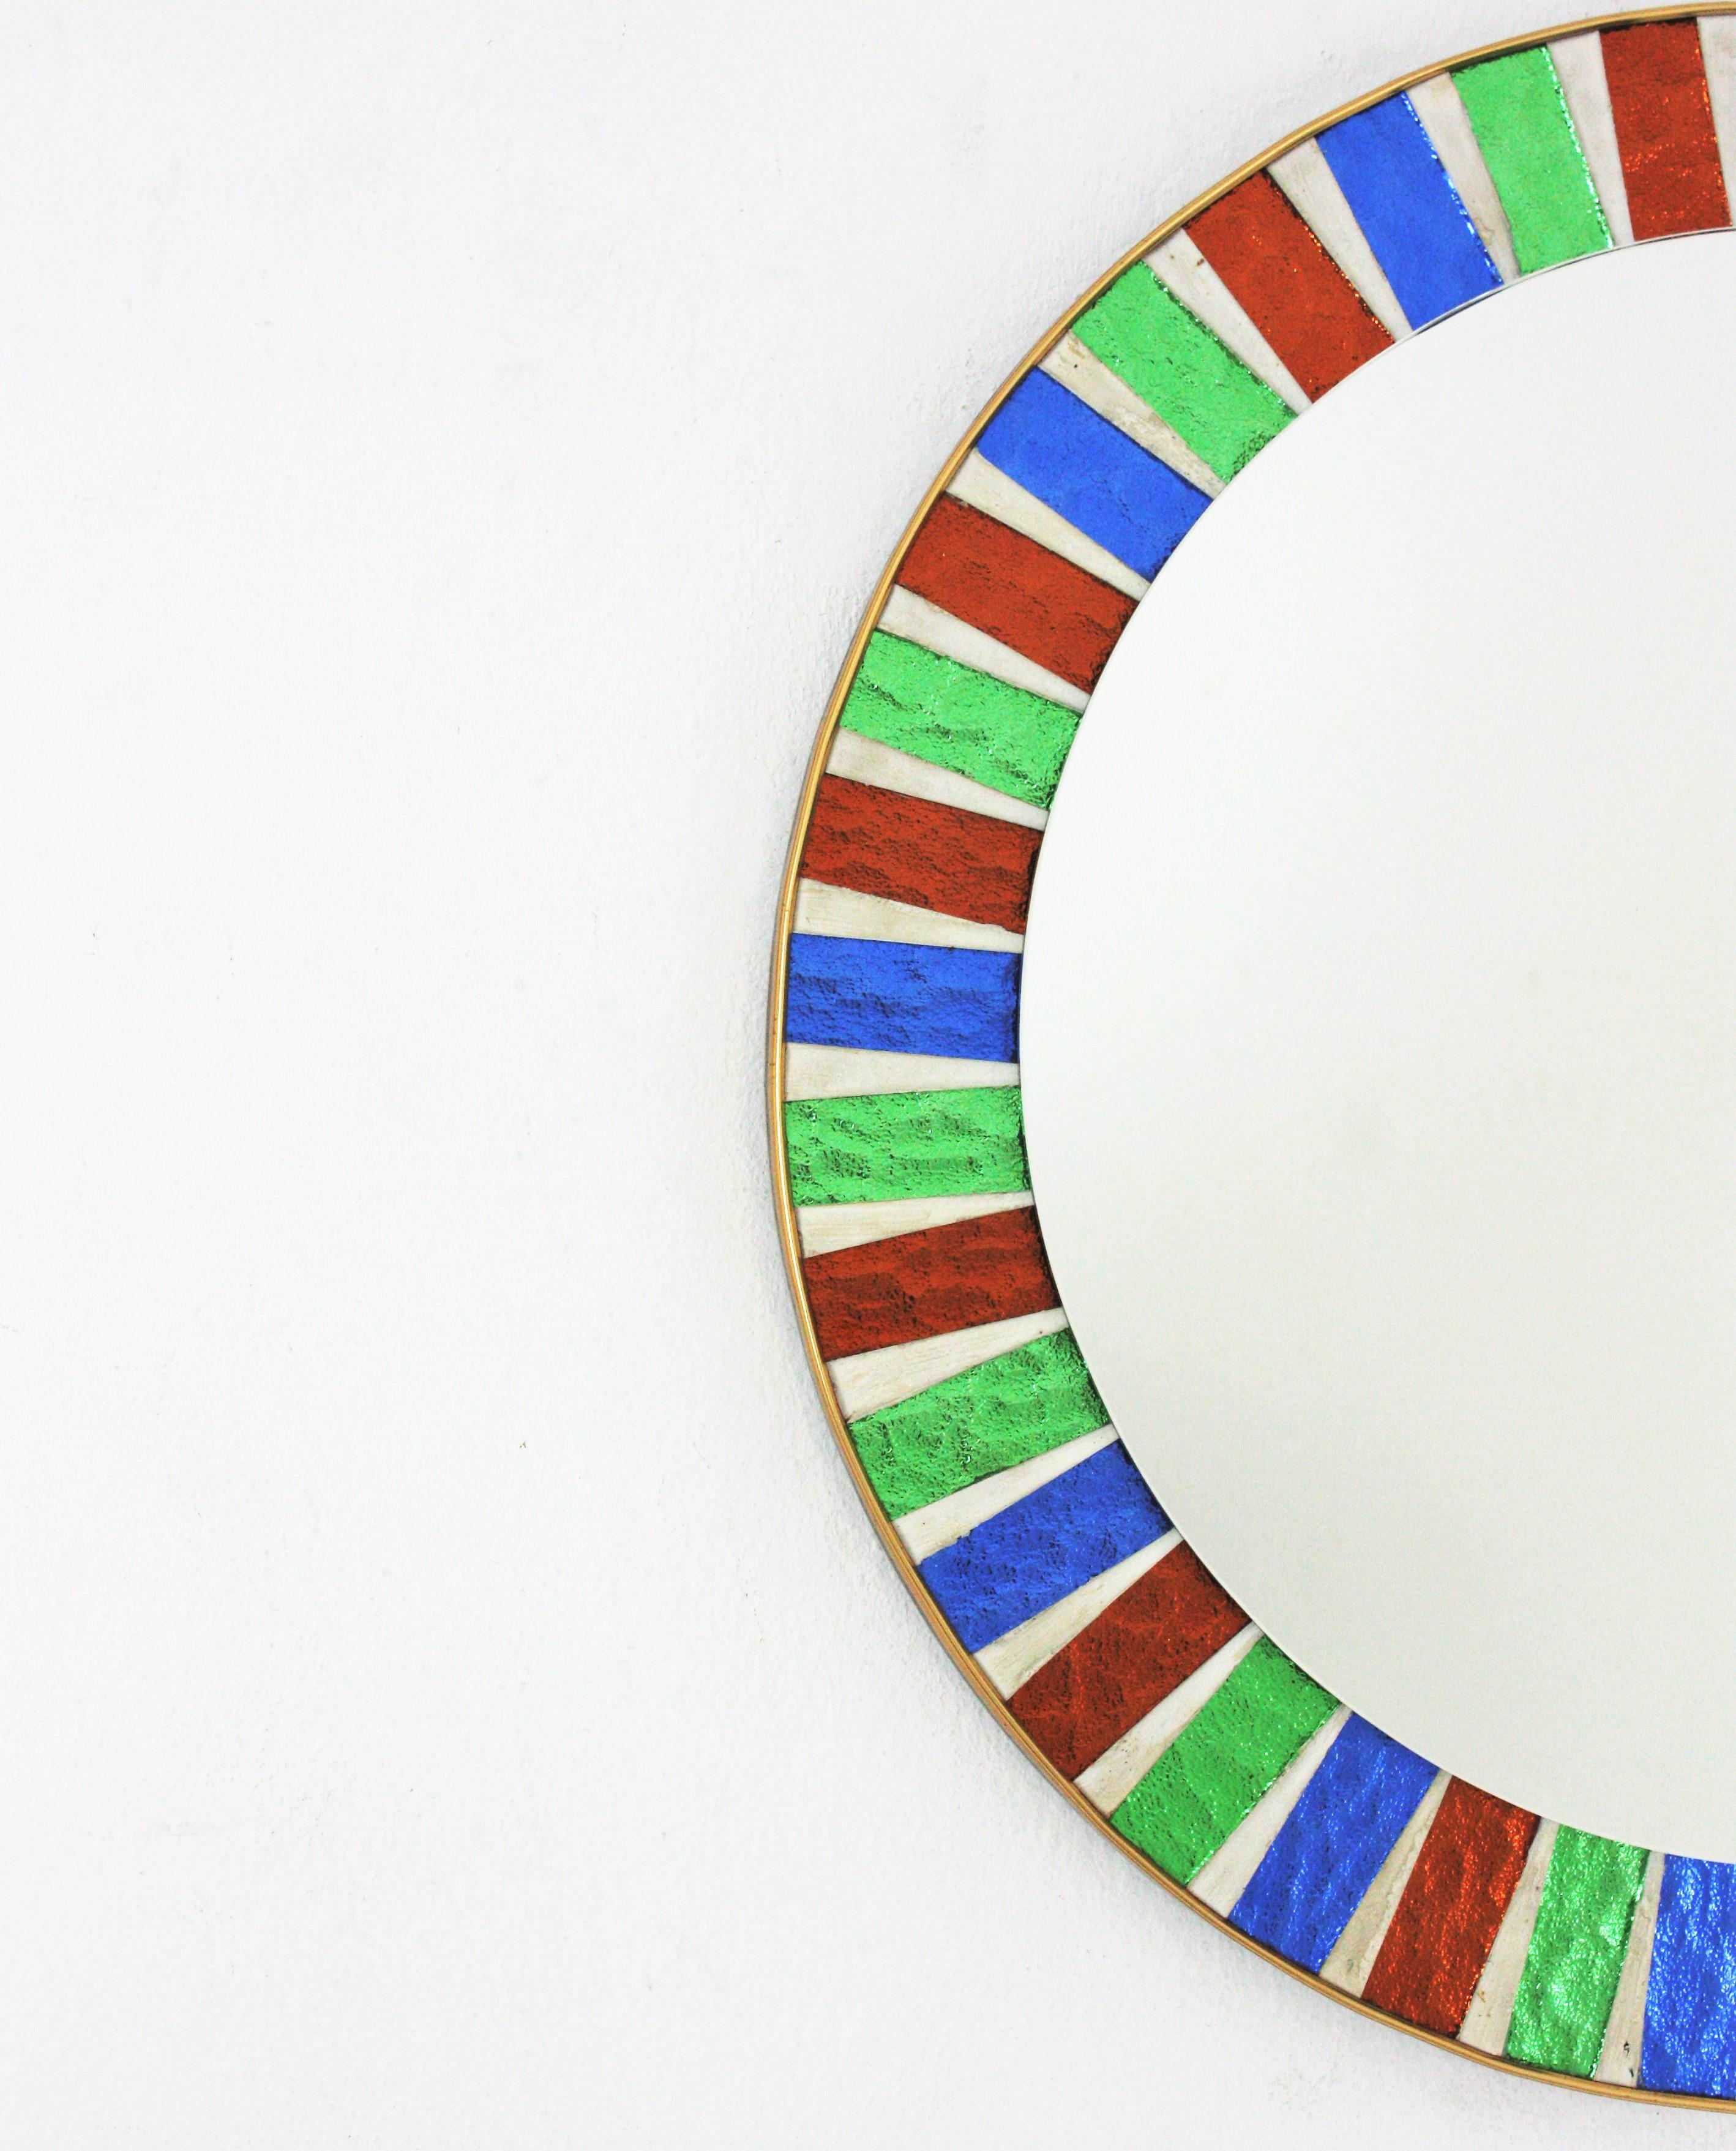 Spanish Round Sunburst Mirror with Multi Color Glass Mosaic Frame For Sale